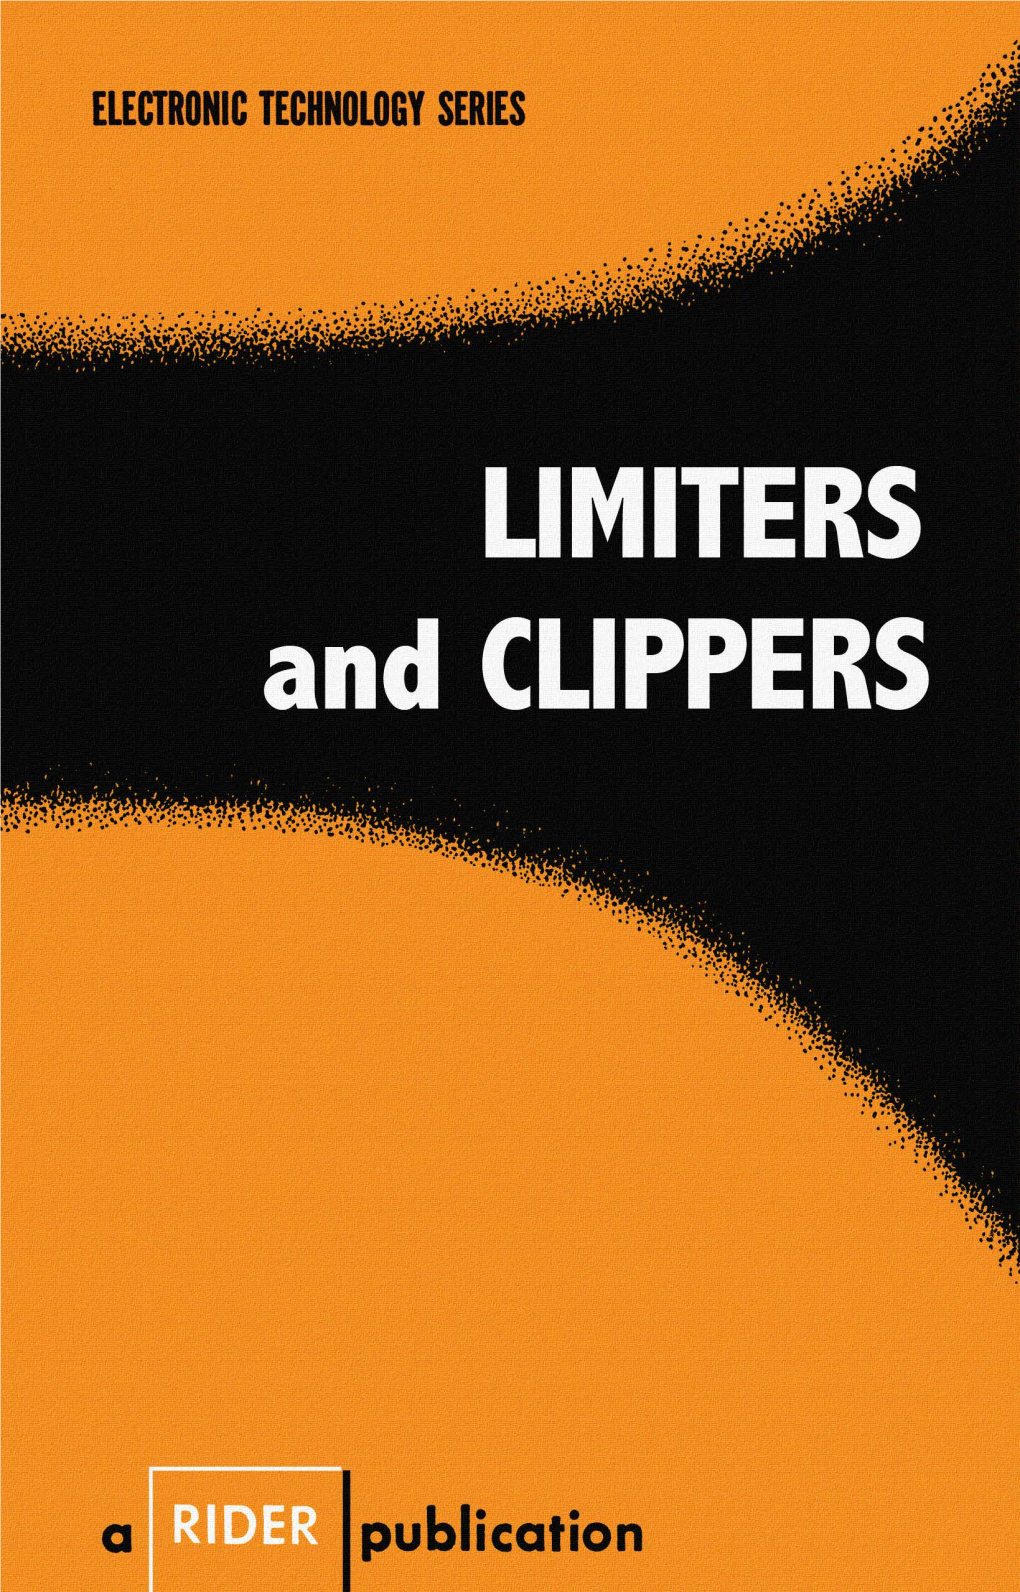 LIMITERS and CLIPPERS